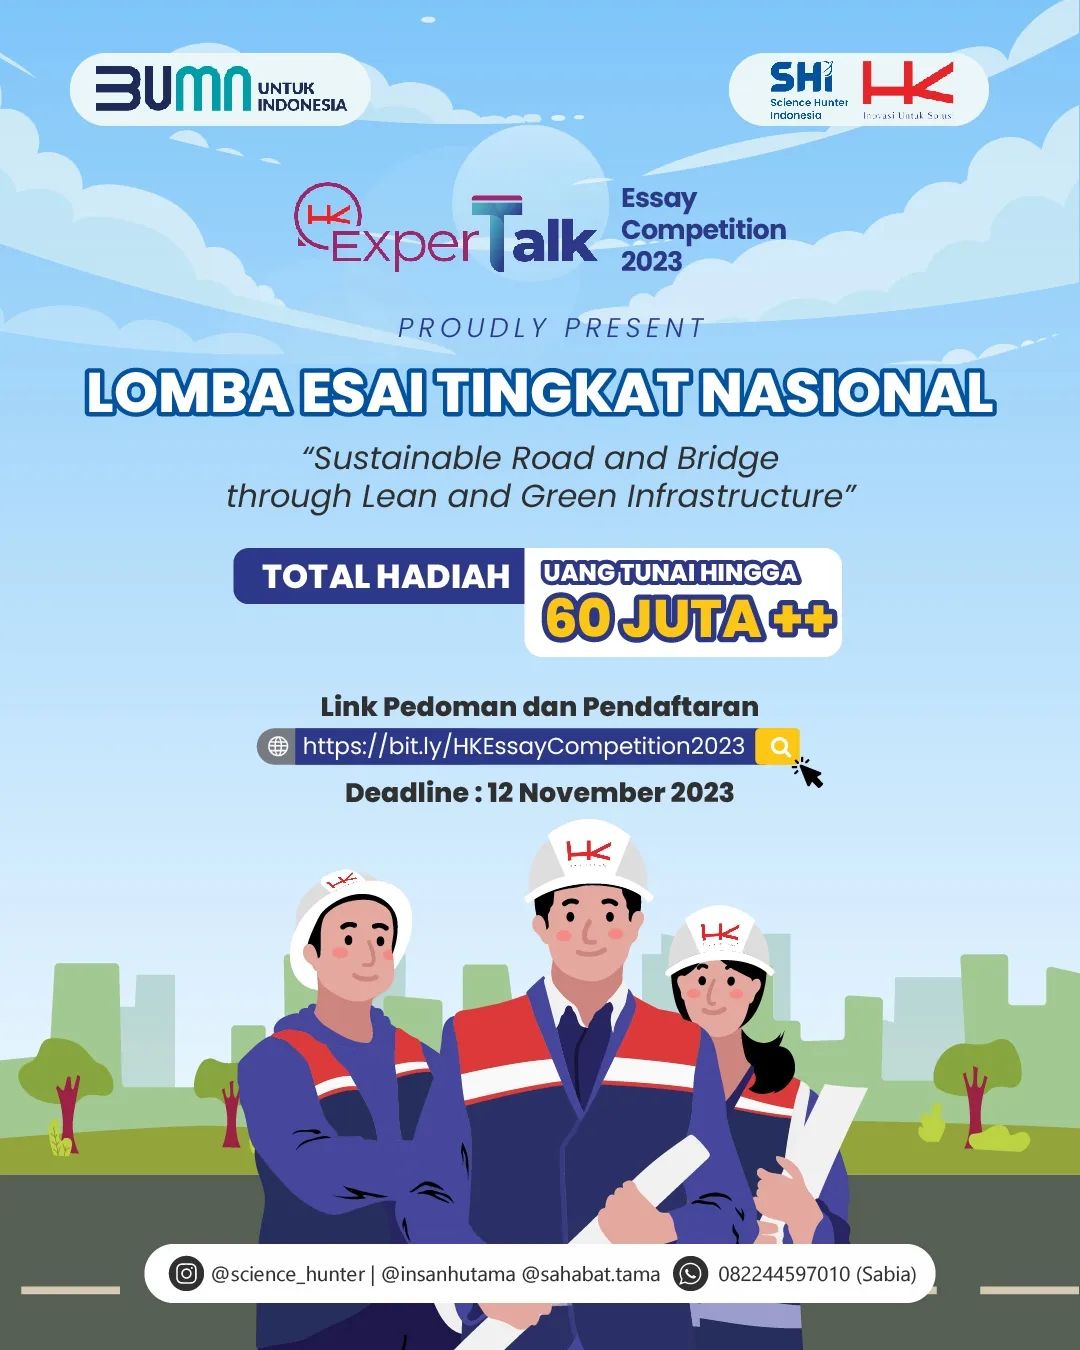 EXPER TALK ESSAY COMPETITION 2023 